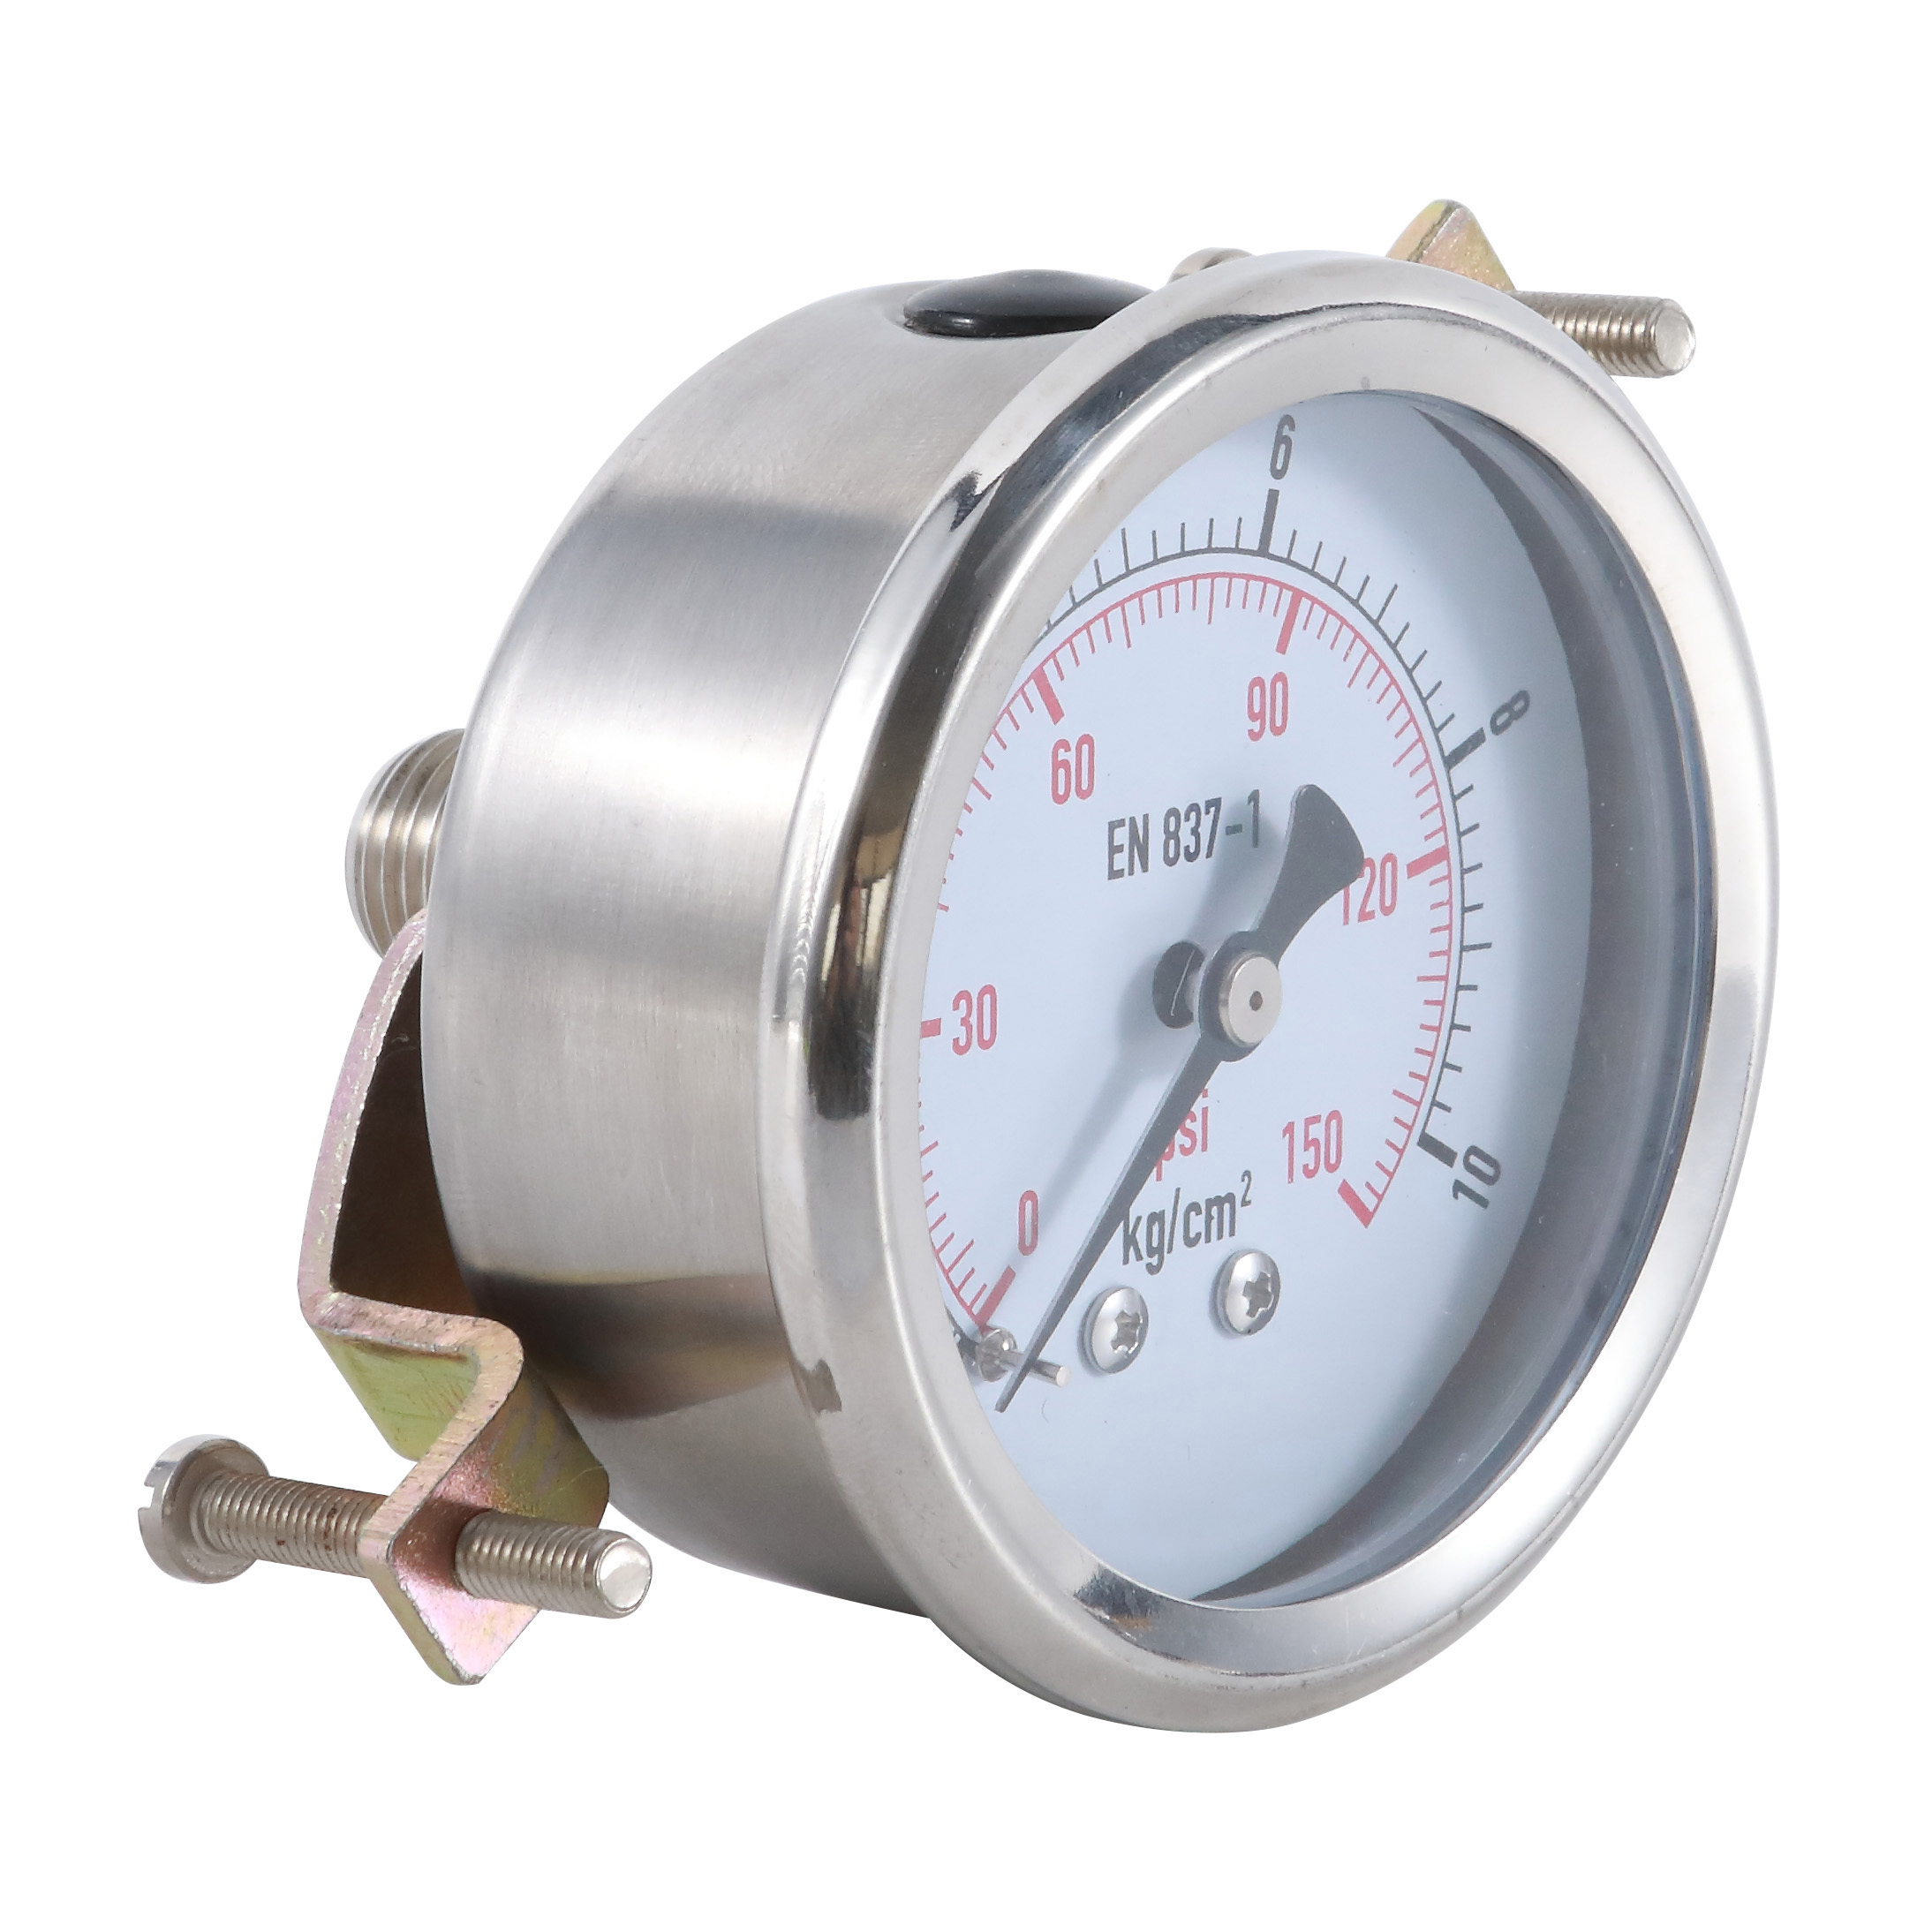 All S.S. Glycerine filled pressure gauge  crimpled type  back connection  with U-Clamp  304 stainless steel case  S.S. connection